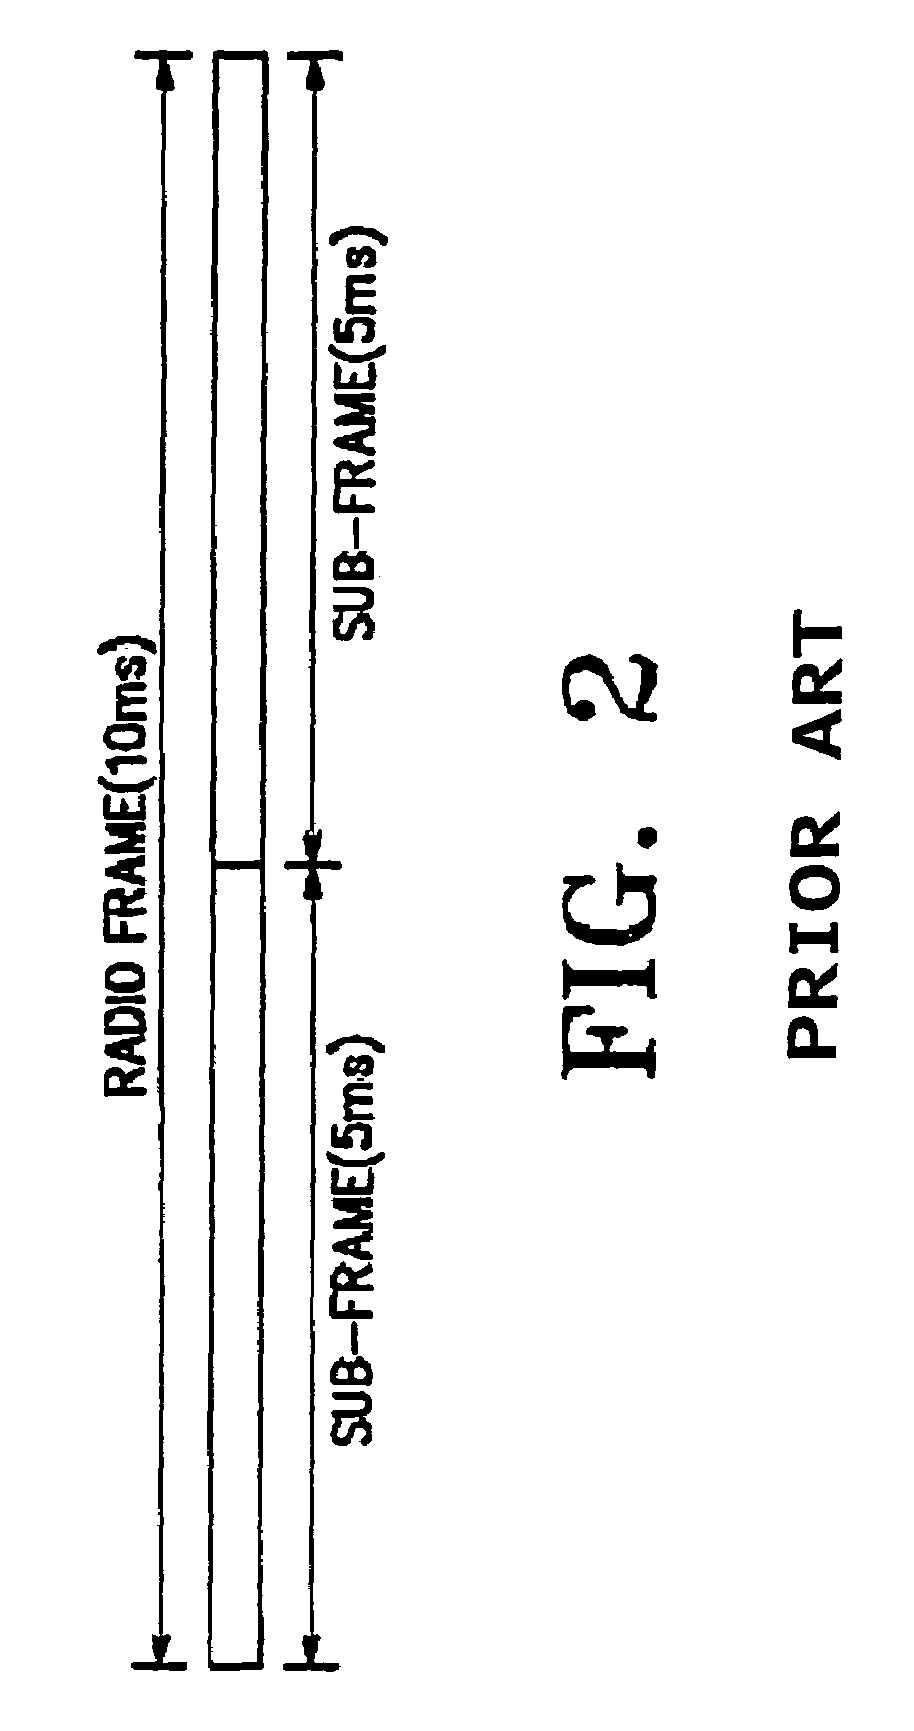 TSTD apparatus and method for a TDD CDMA mobile communication system